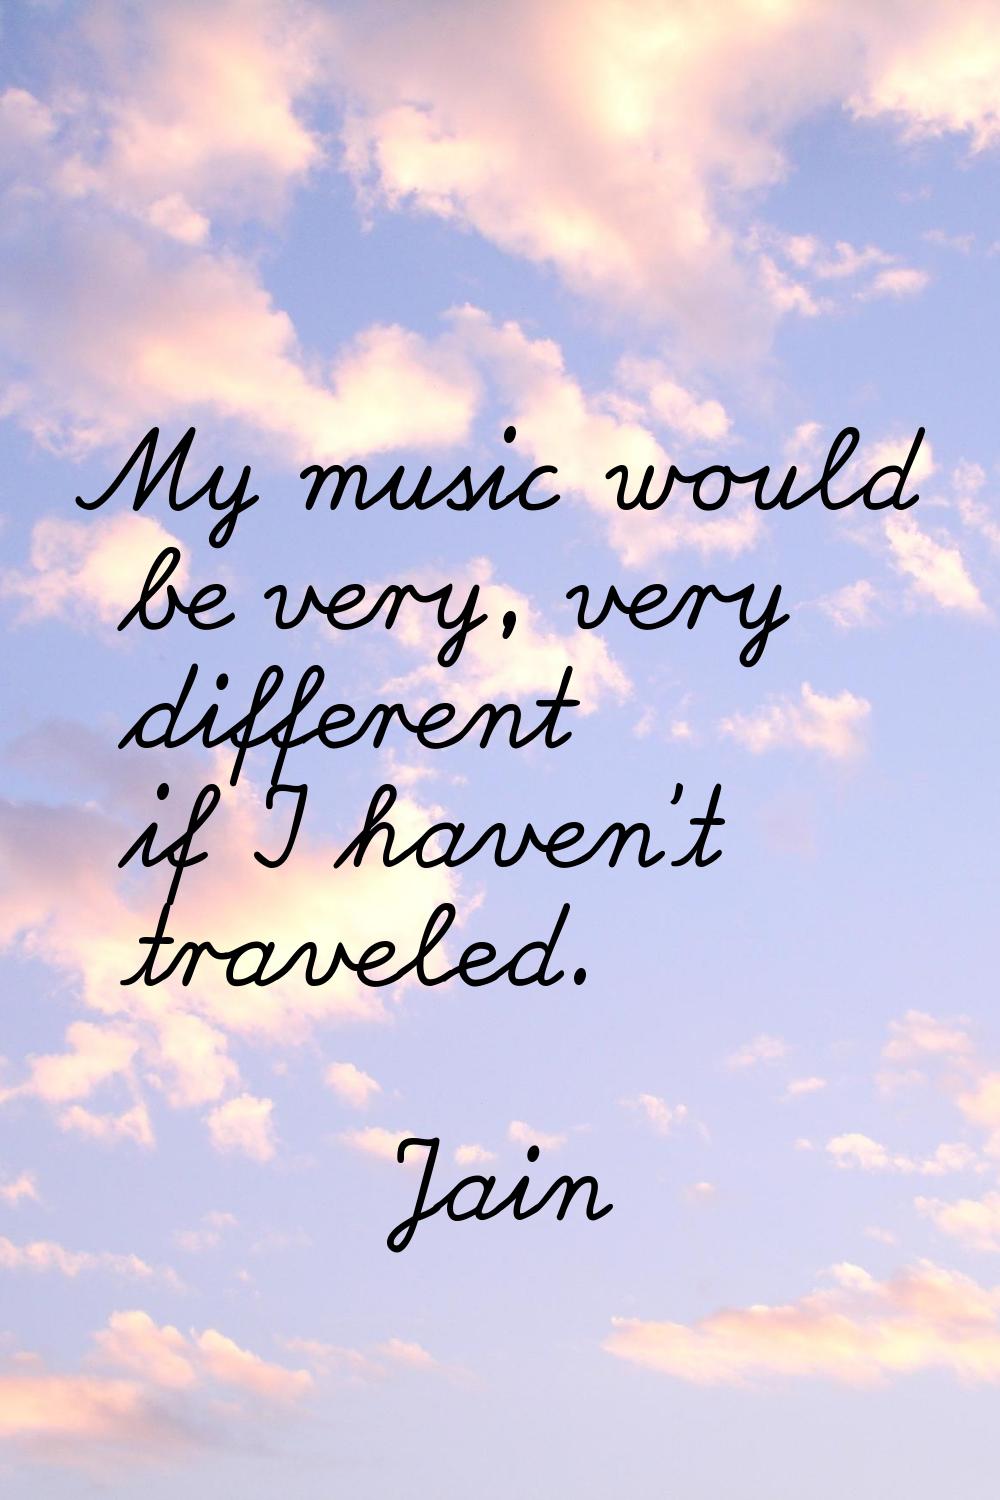 My music would be very, very different if I haven't traveled.